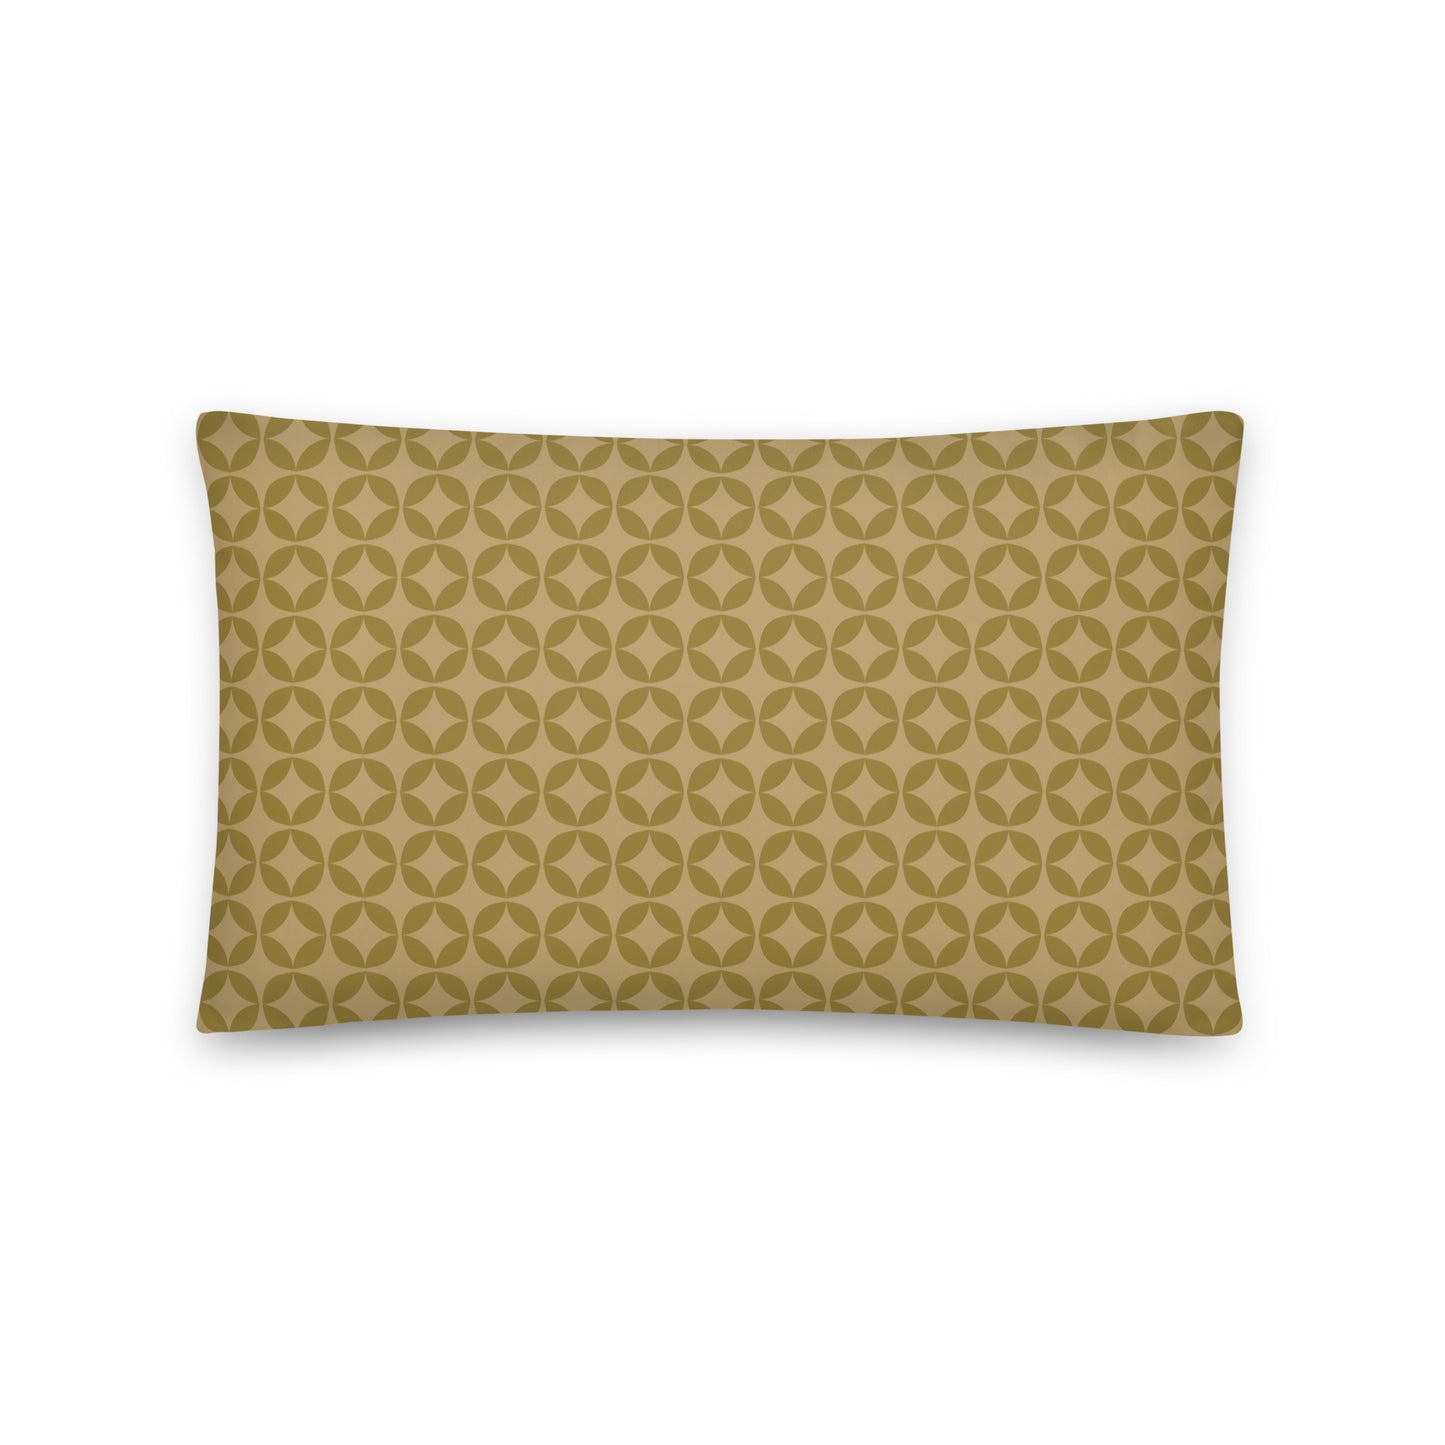 Wempy Dyocta Koto Signature Luxury - Sustainably Made Pillow